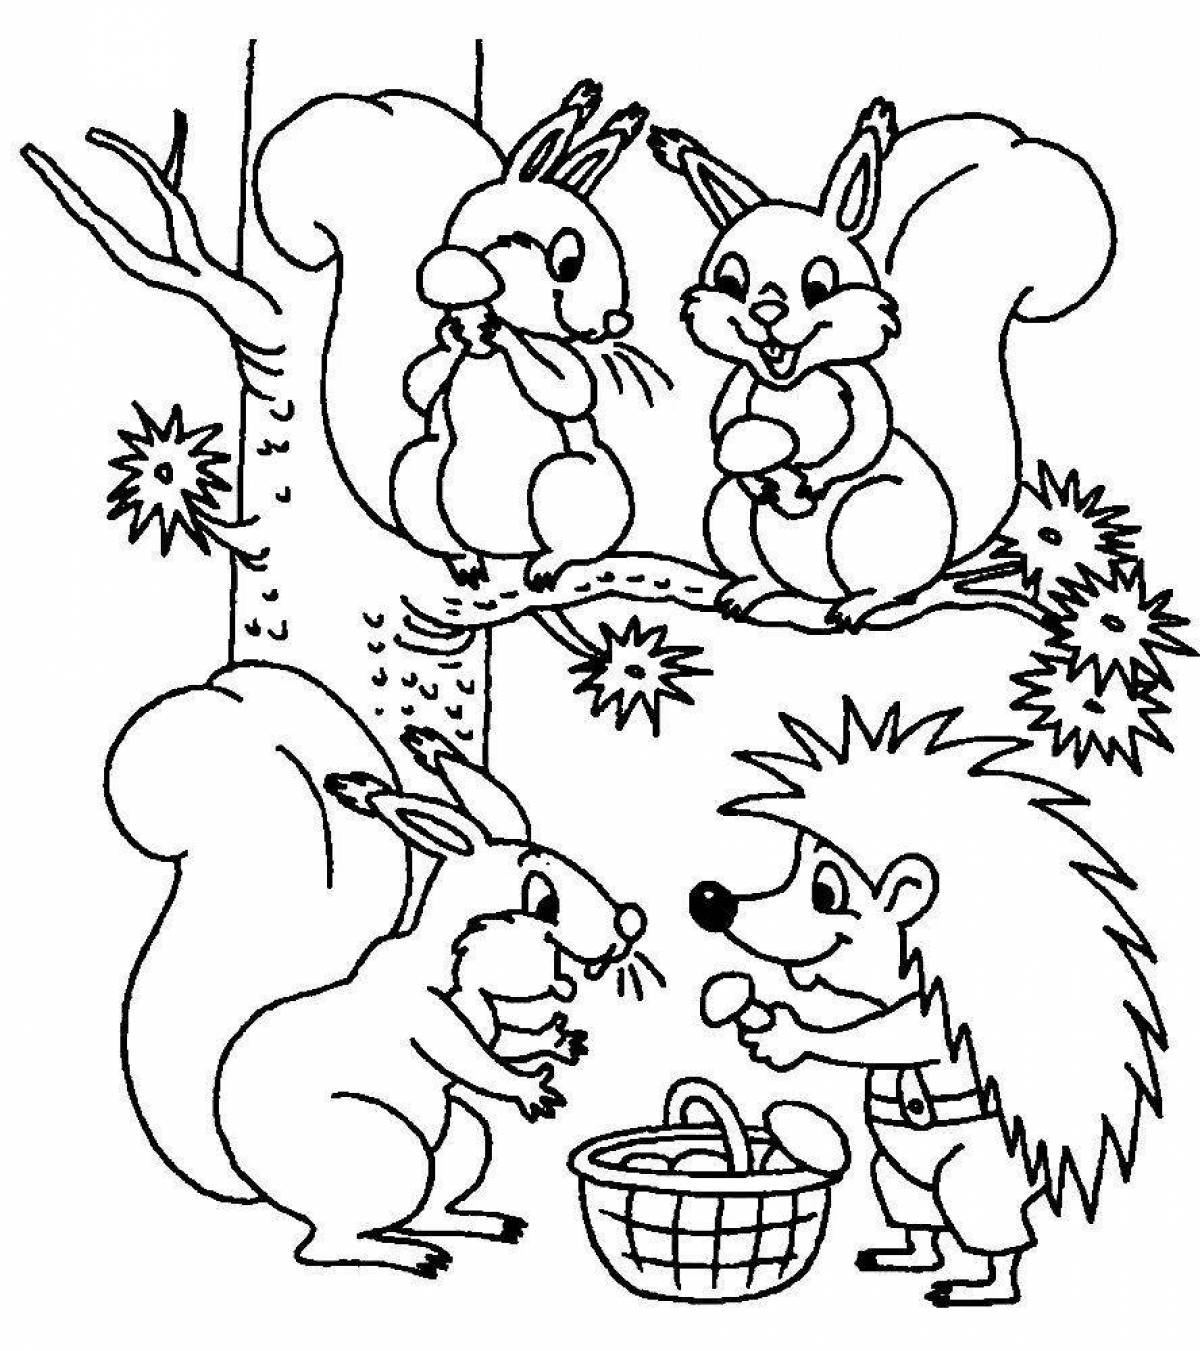 Colorful forest animals coloring page for kids